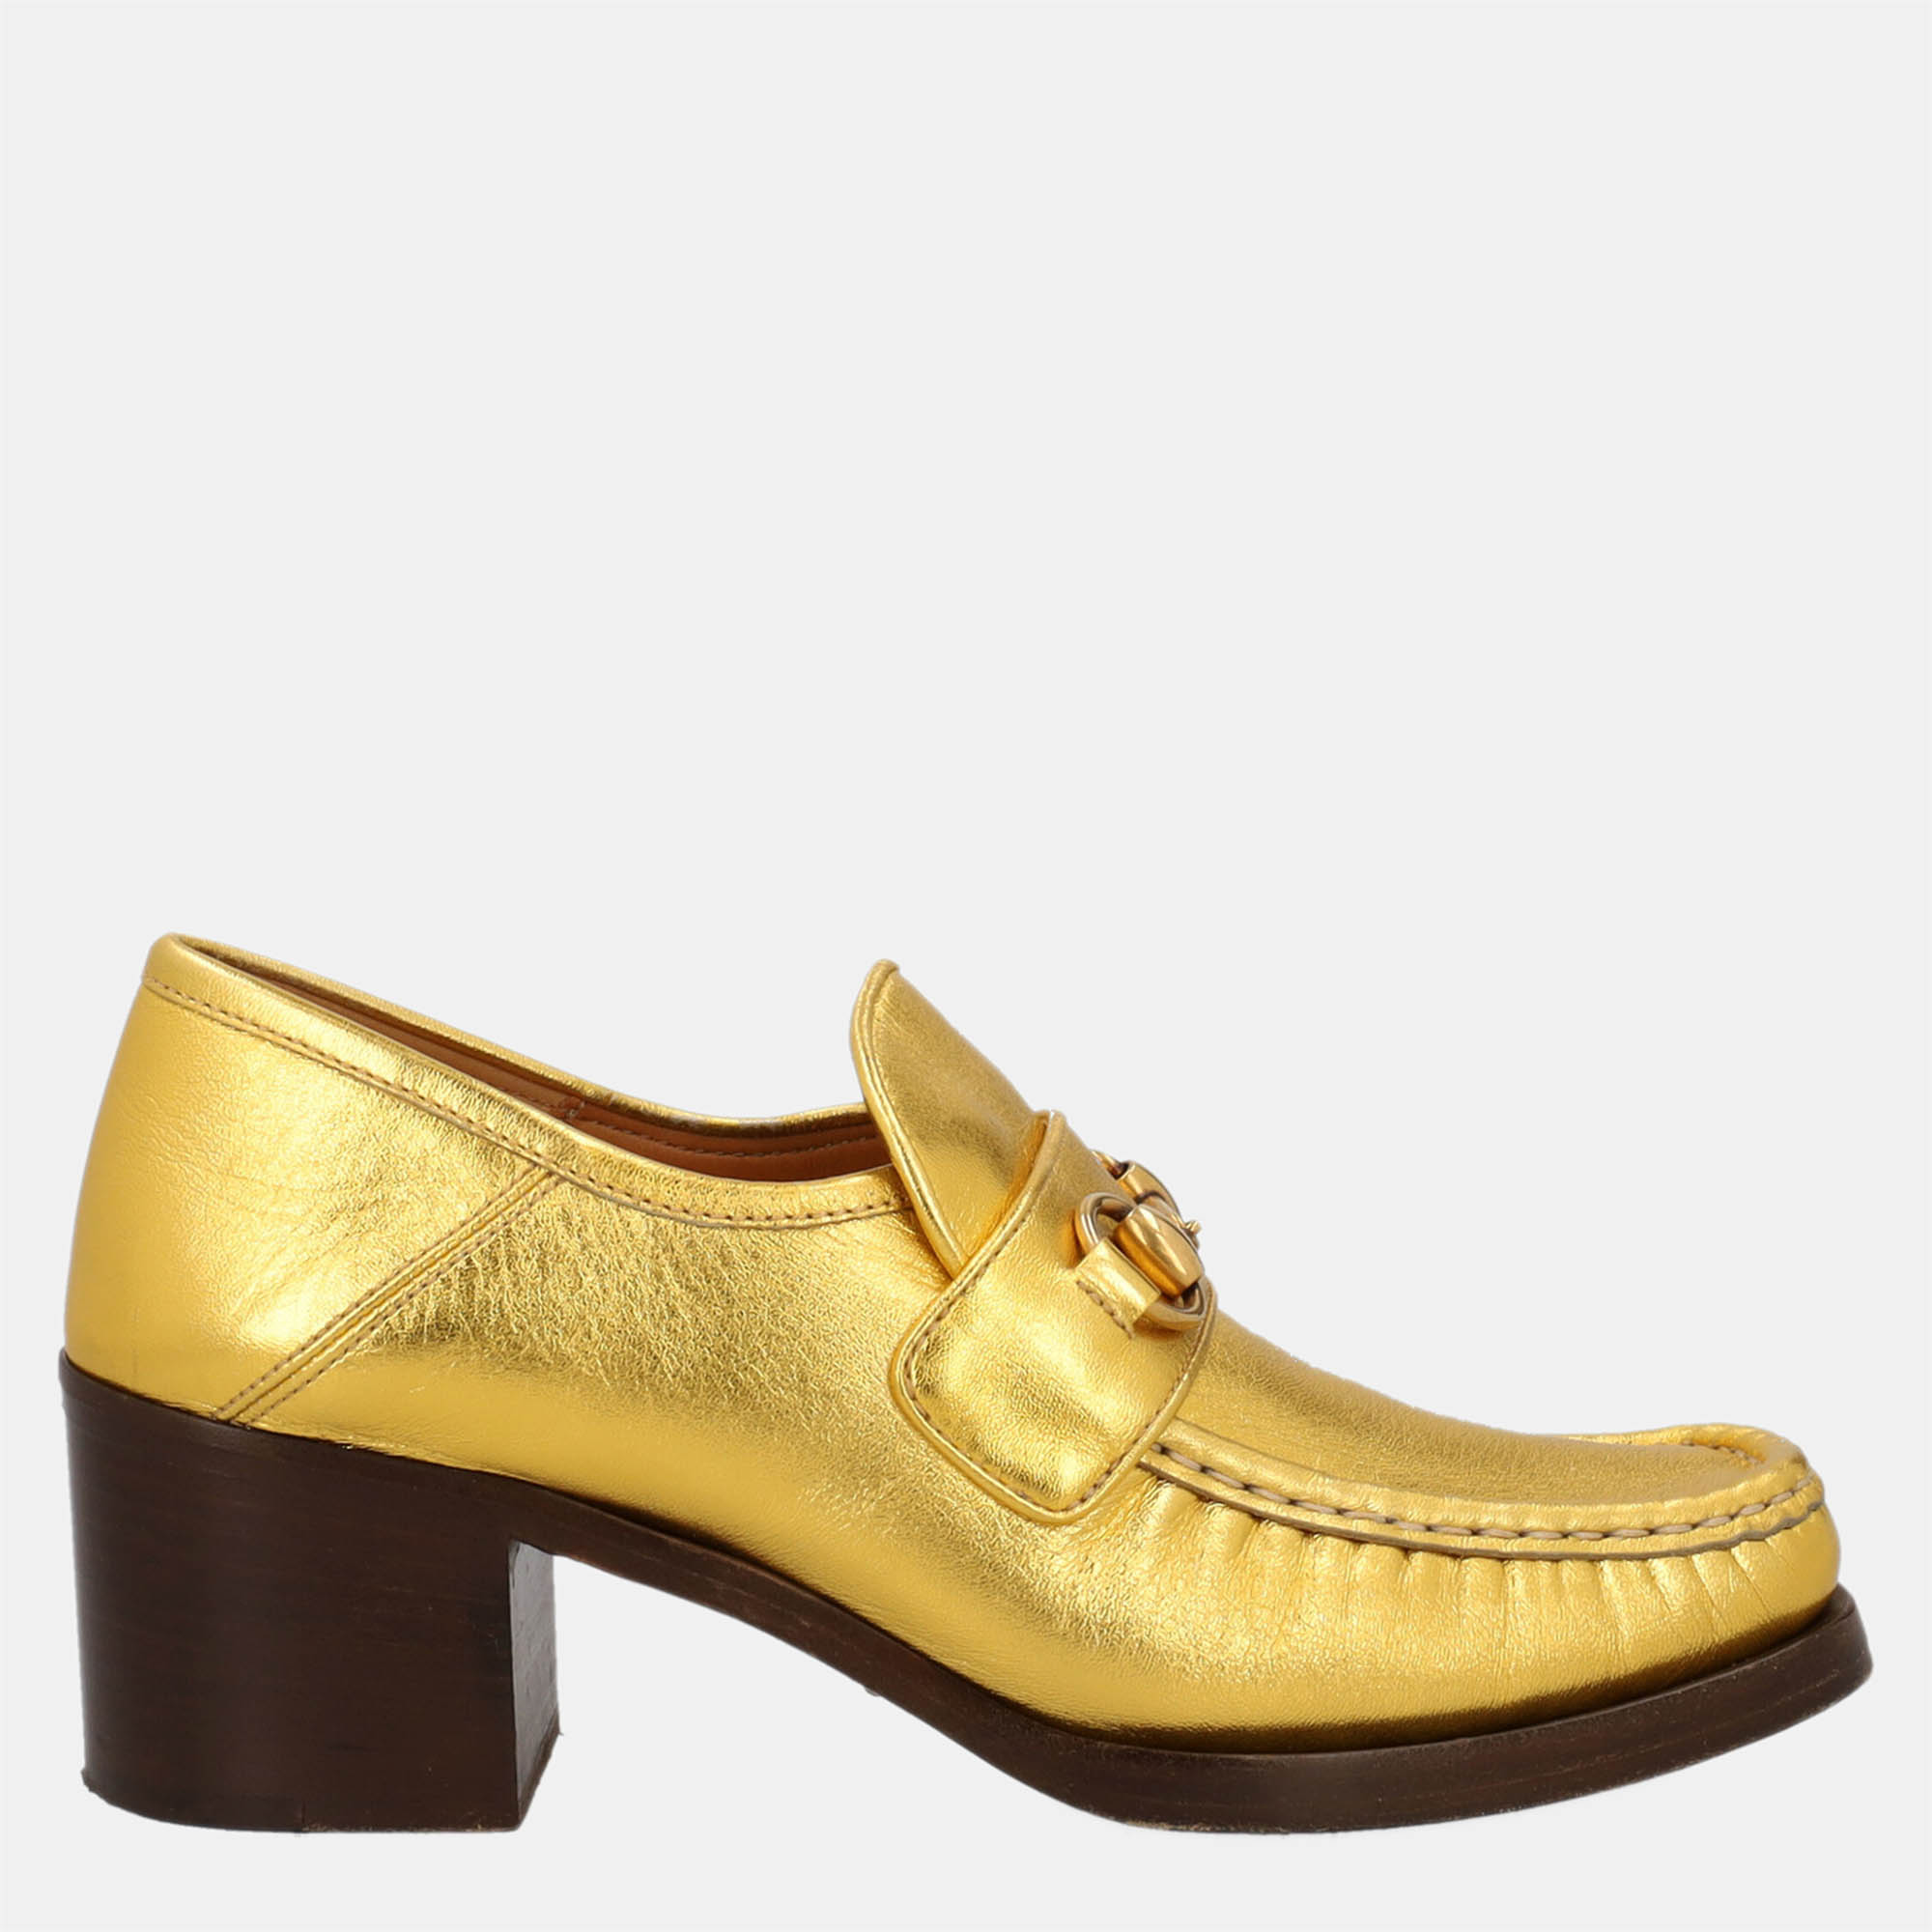 Gucci  Women's Leather Loafers - Gold - EU 38.5